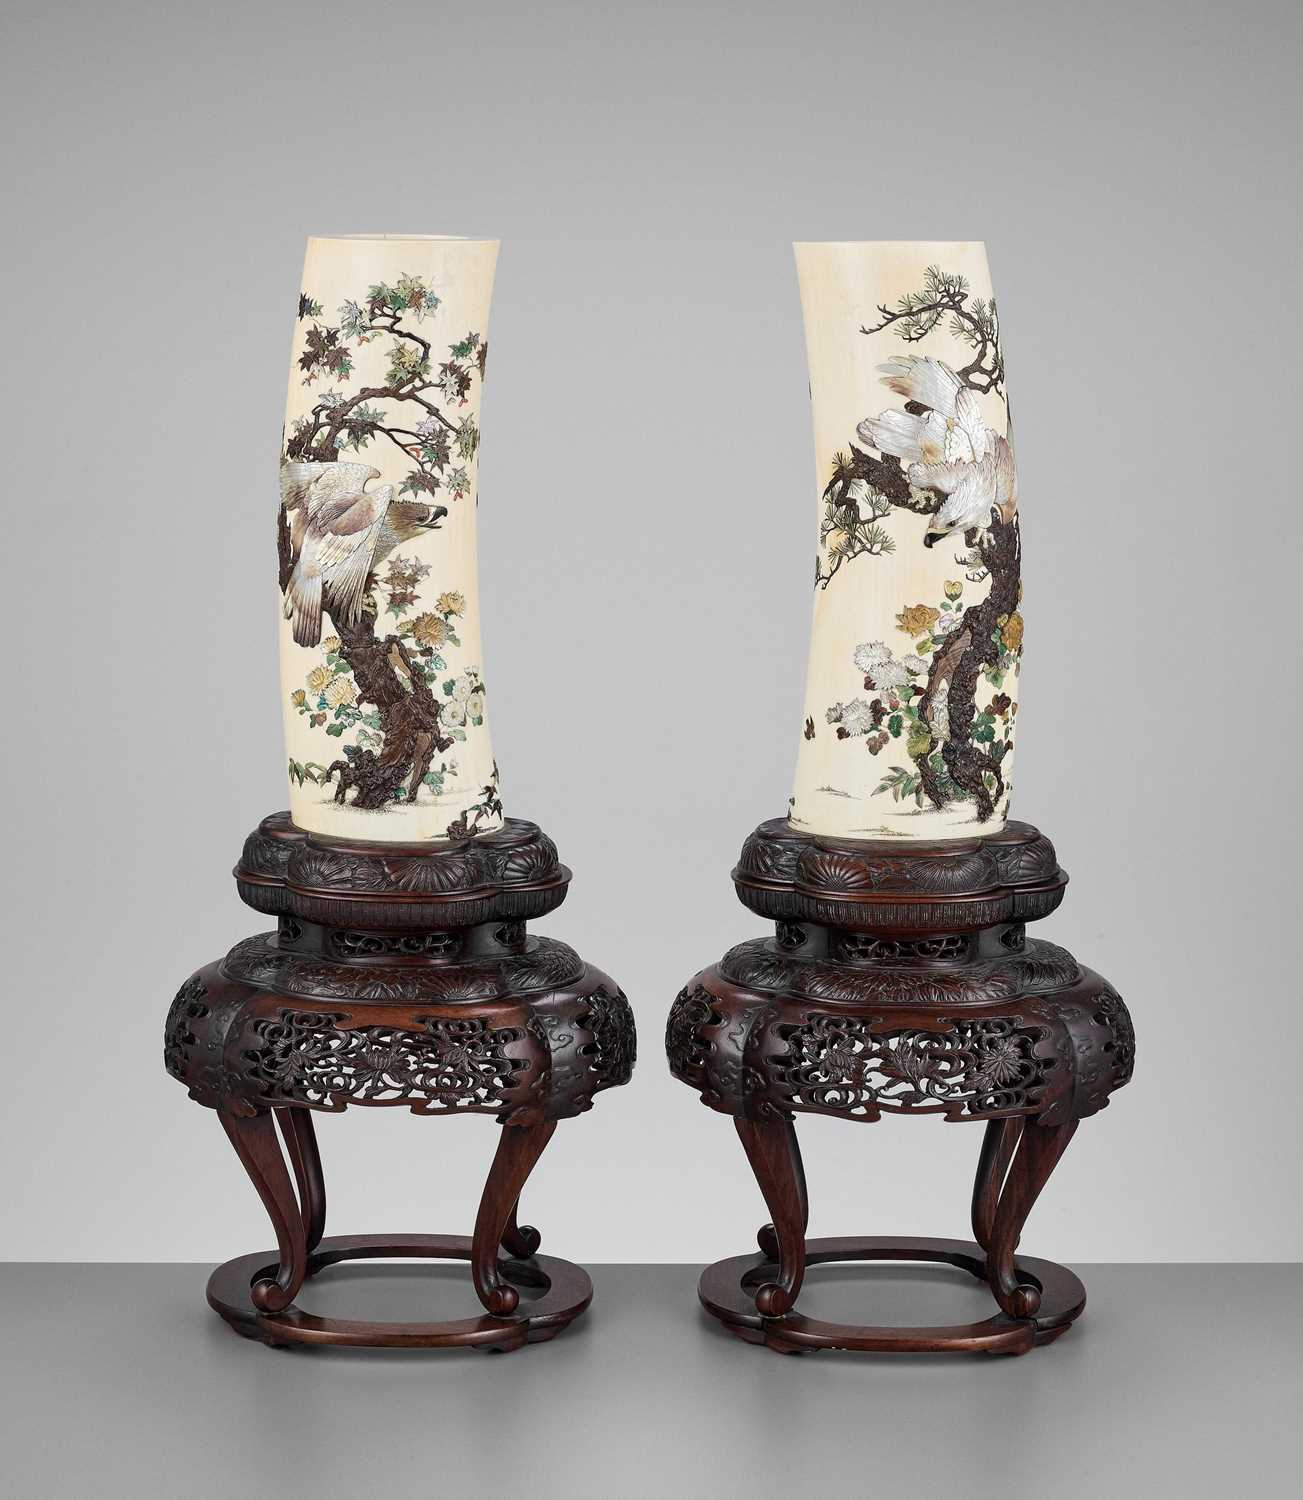 Lot 257 - AN IMPRESSIVE PAIR OF SHIBAYAMA INLAID TUSK VASES ON WOOD STANDS